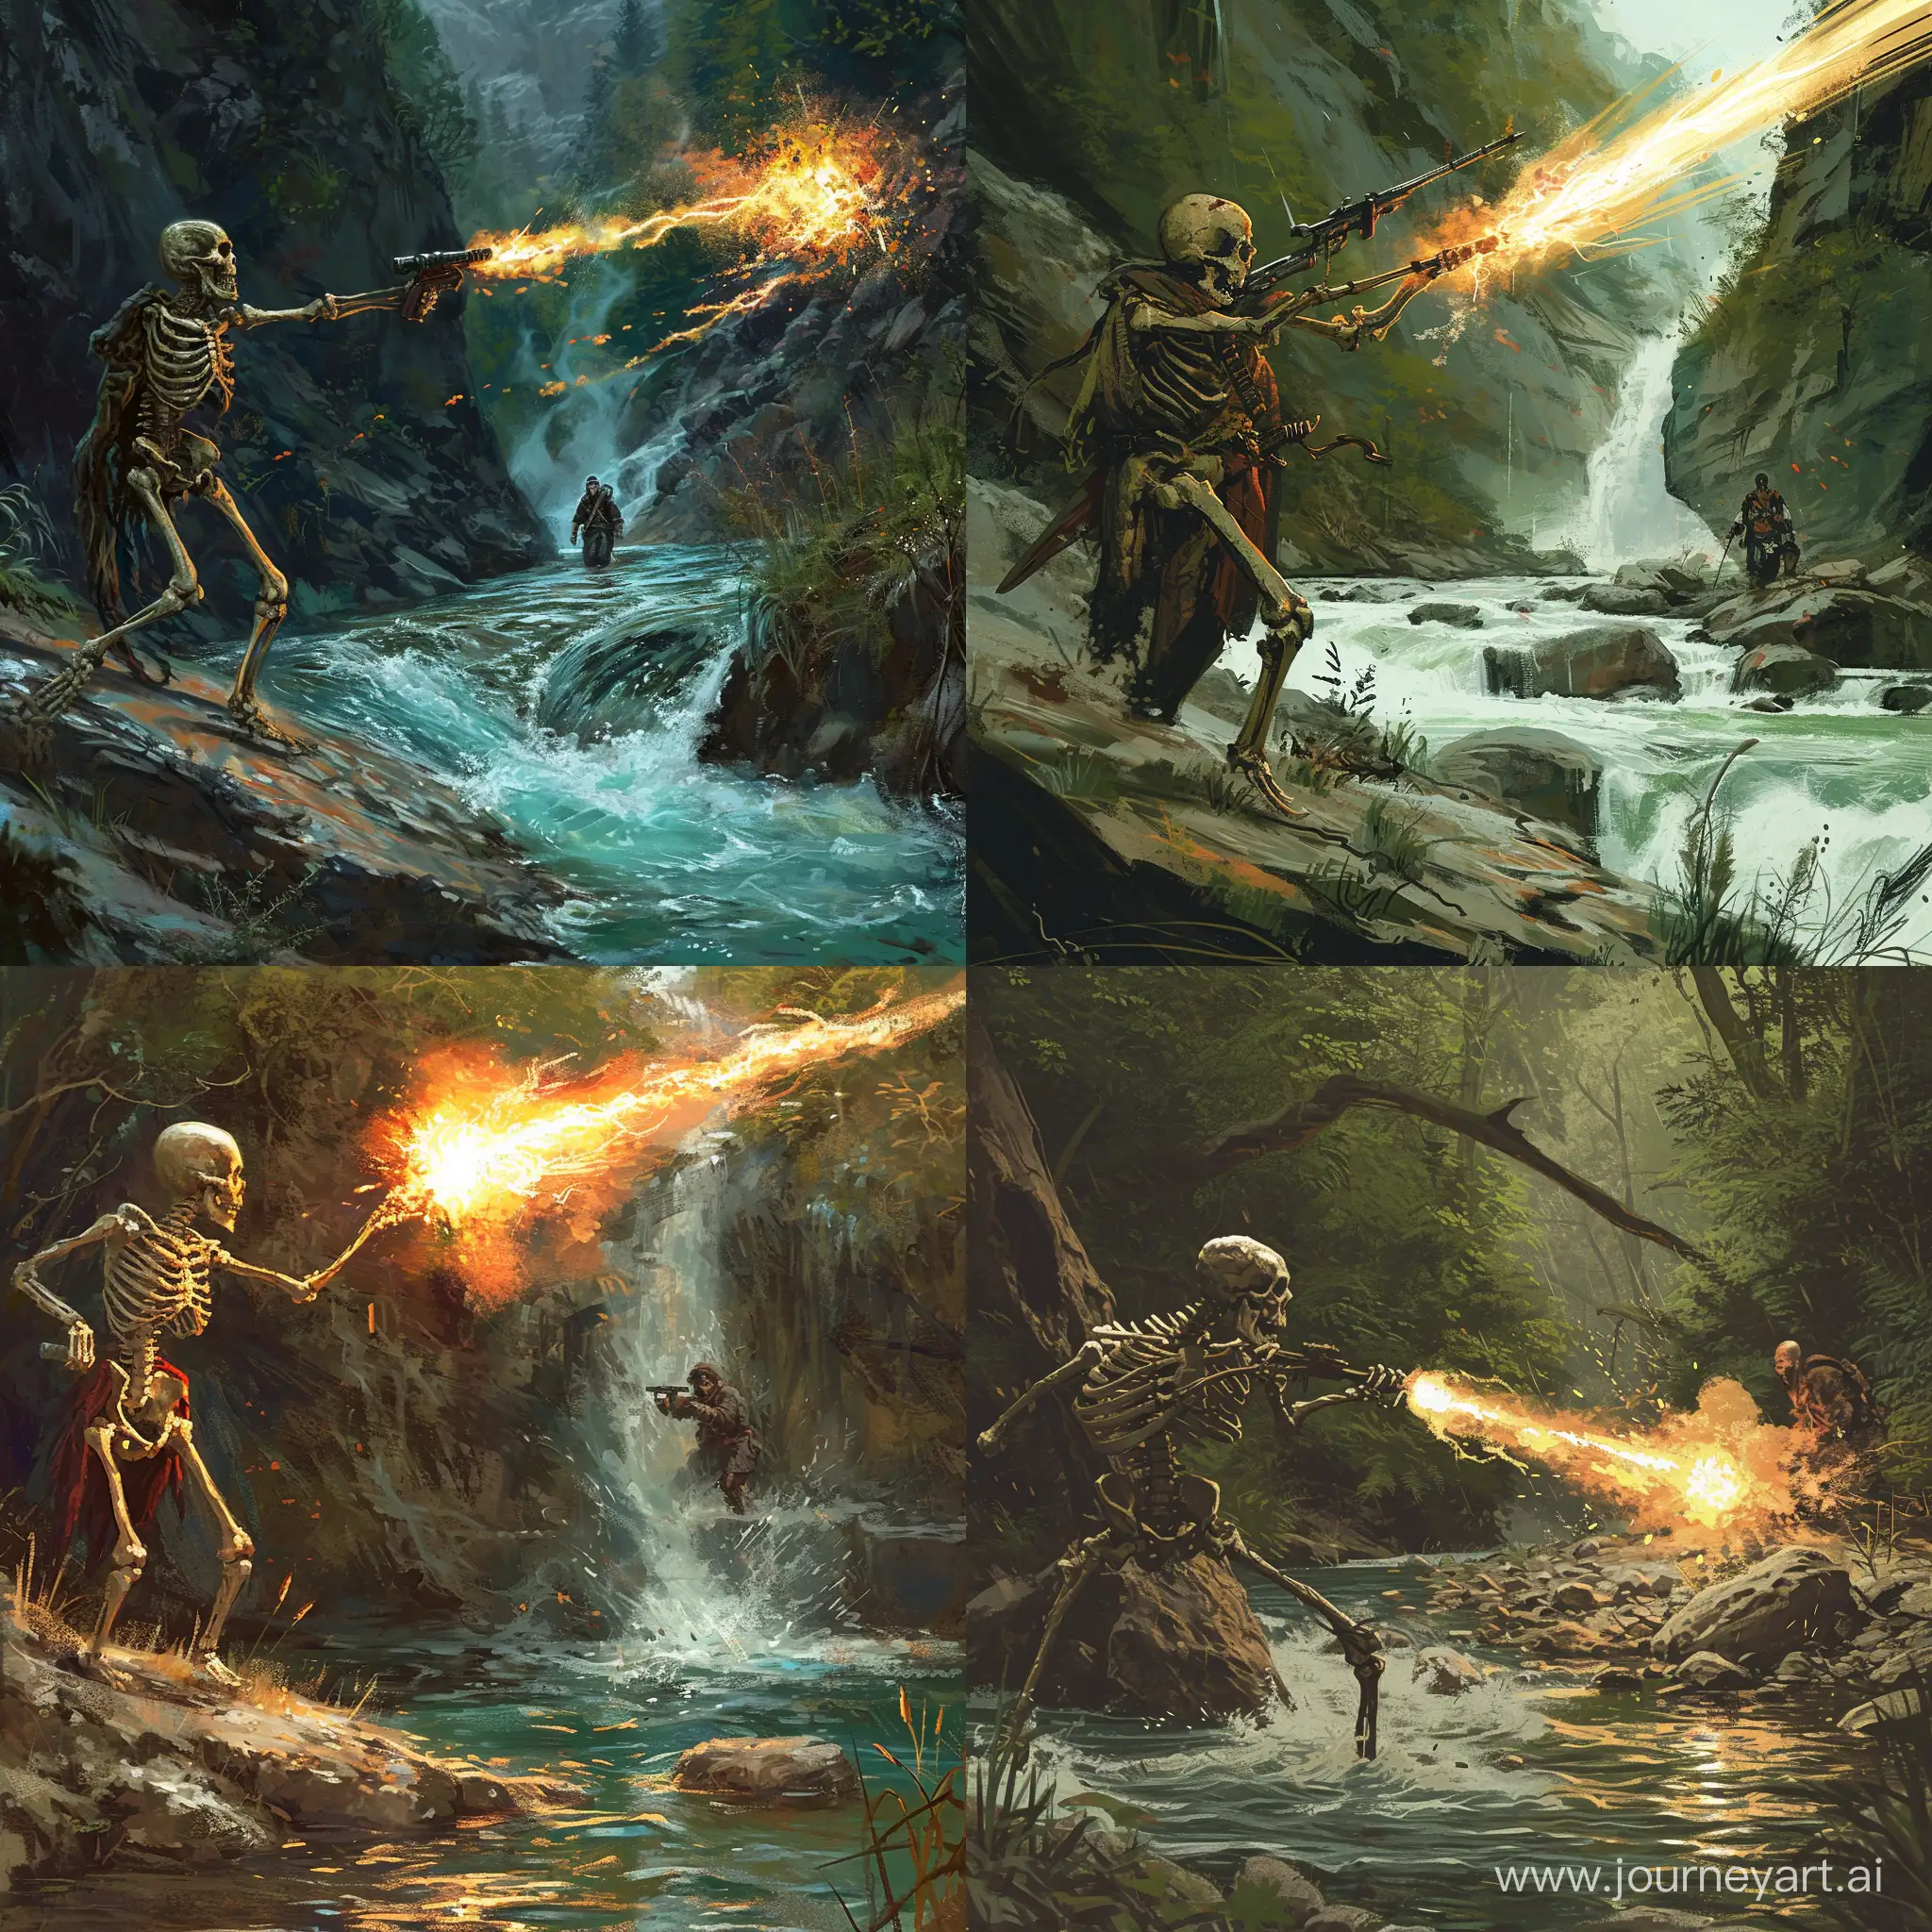 Magical-Skeleton-Warrior-Casting-Spells-at-Man-by-the-River